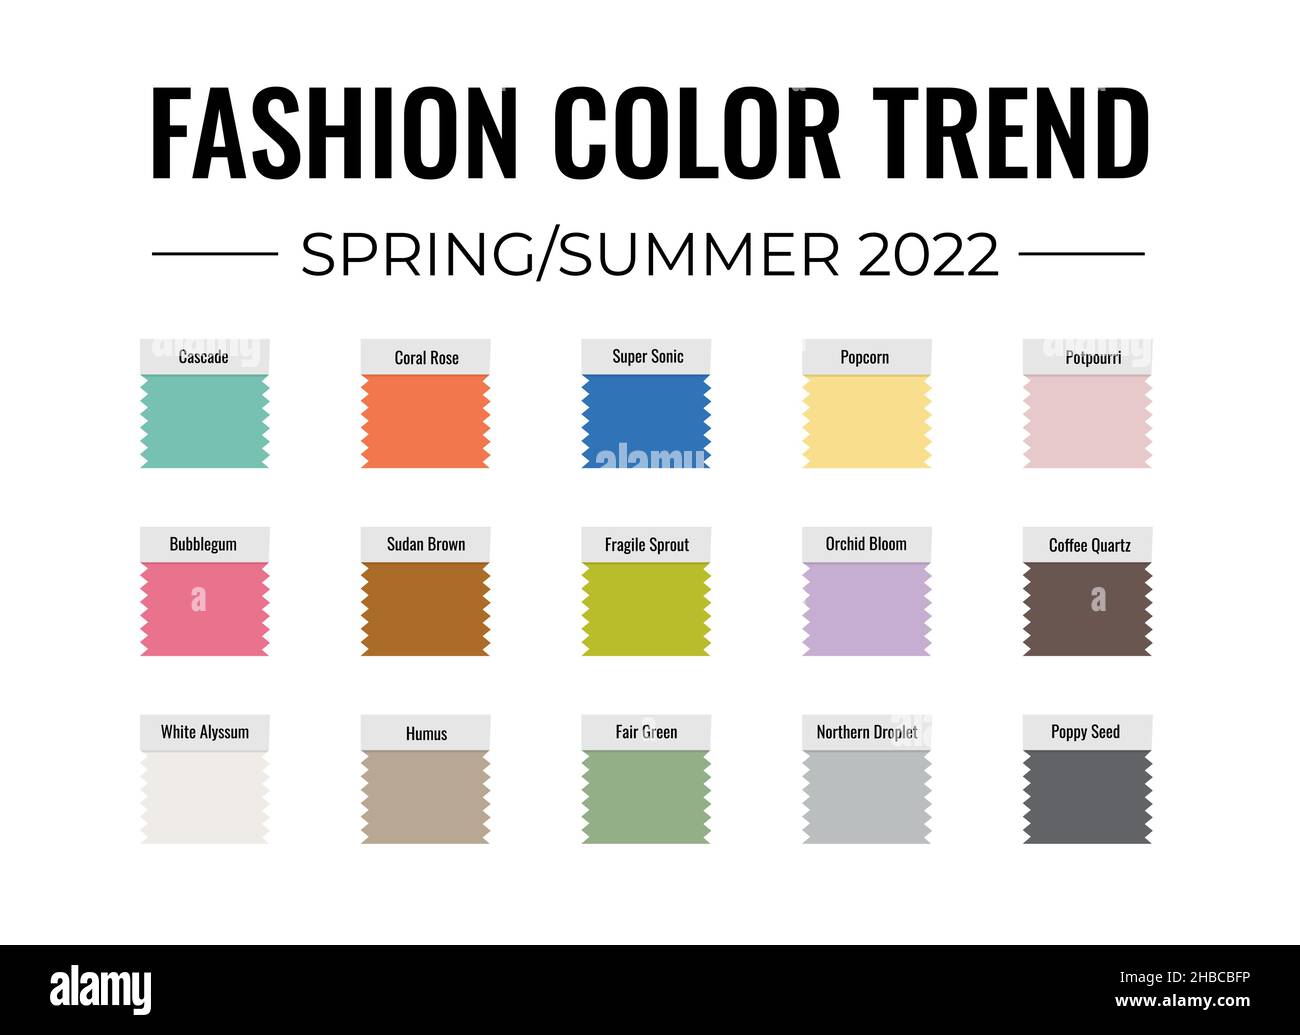 Fashion Color Trend Spring - Summer 2022. Trendy colors palette guide ...